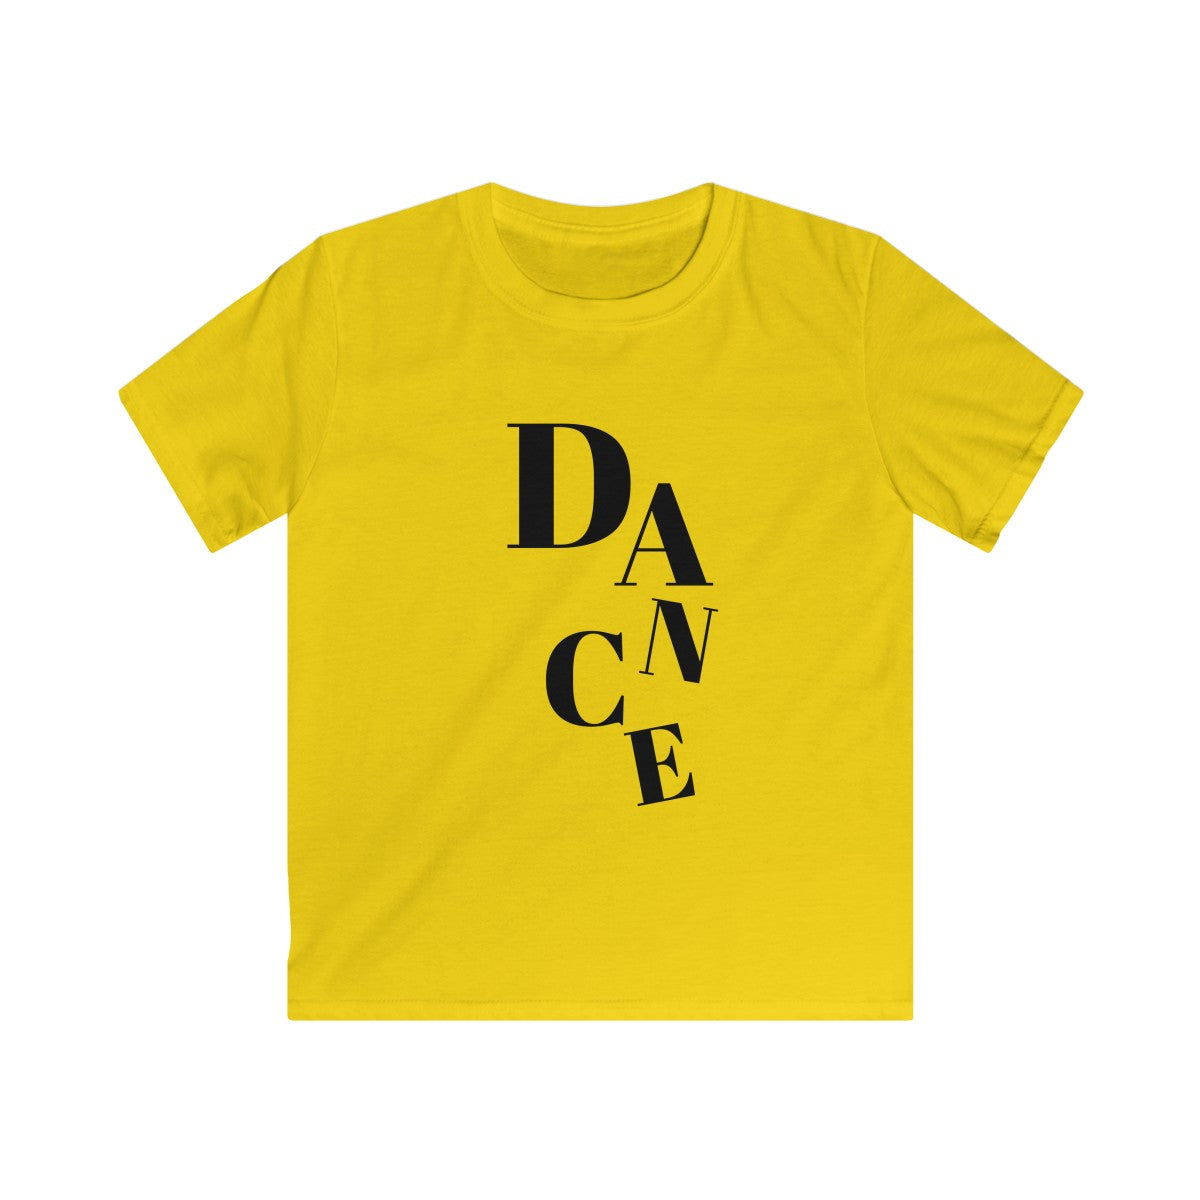 Kids Softstyle Dance Tee - SD-style-shop